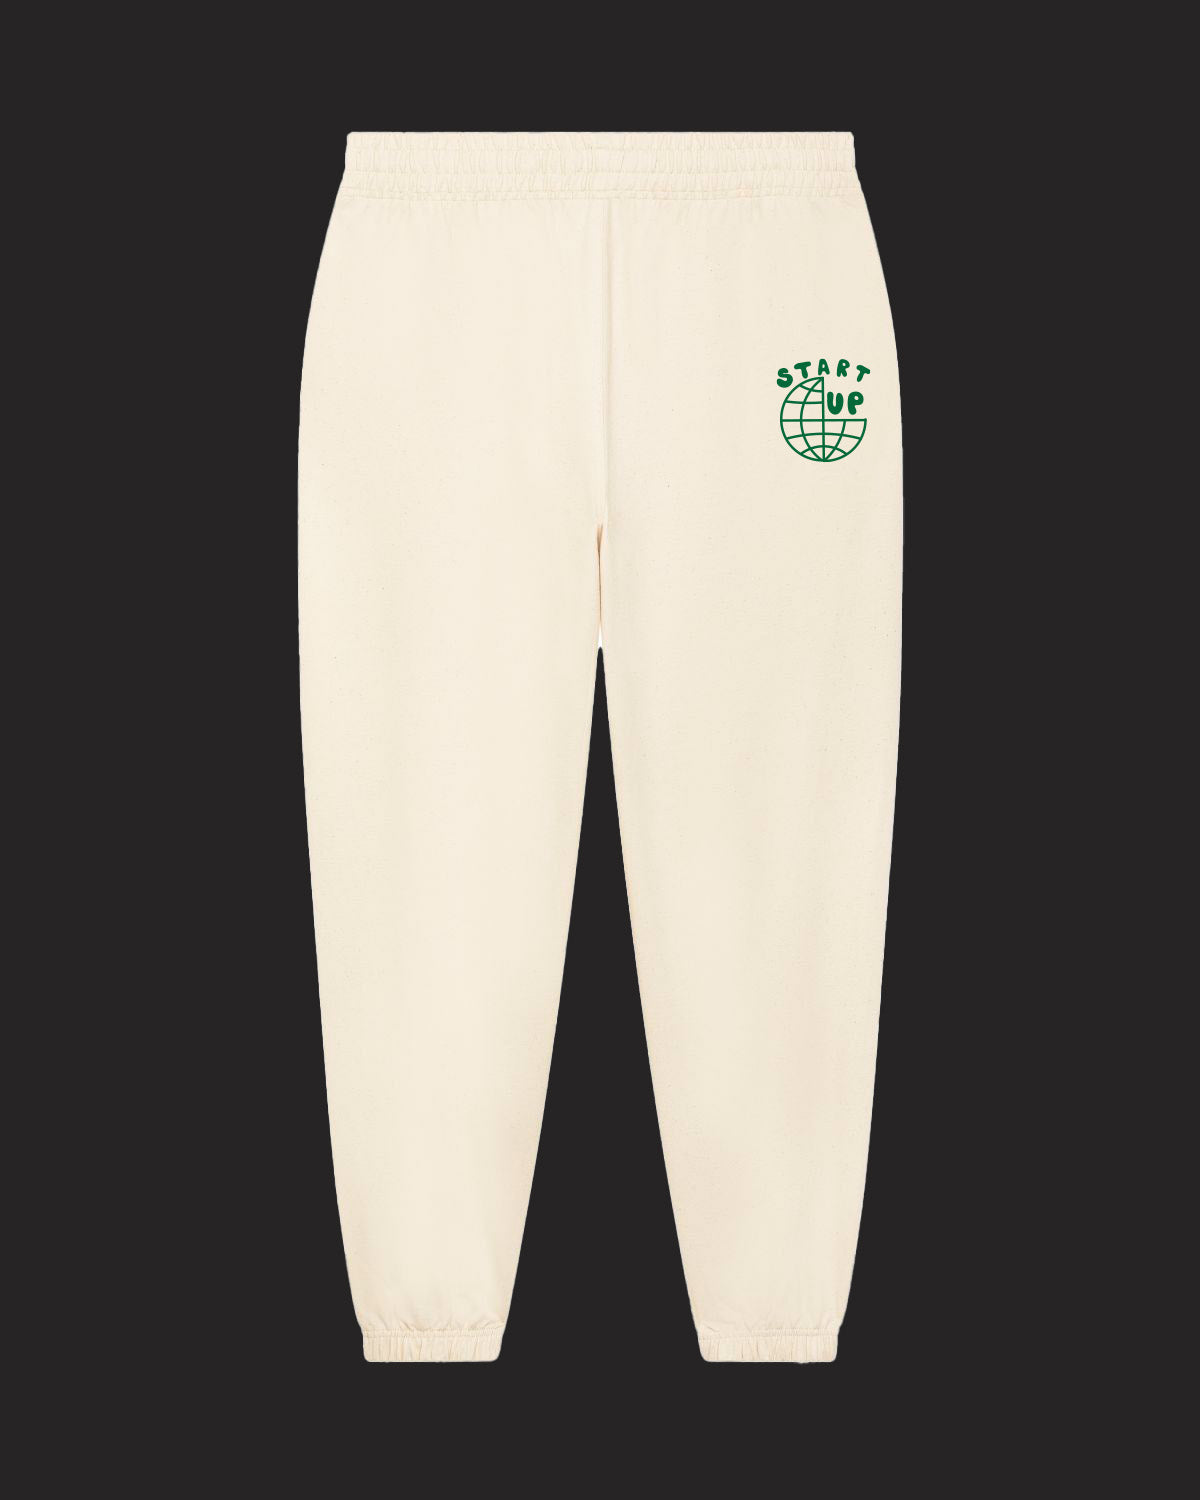 customize your own sweatpants